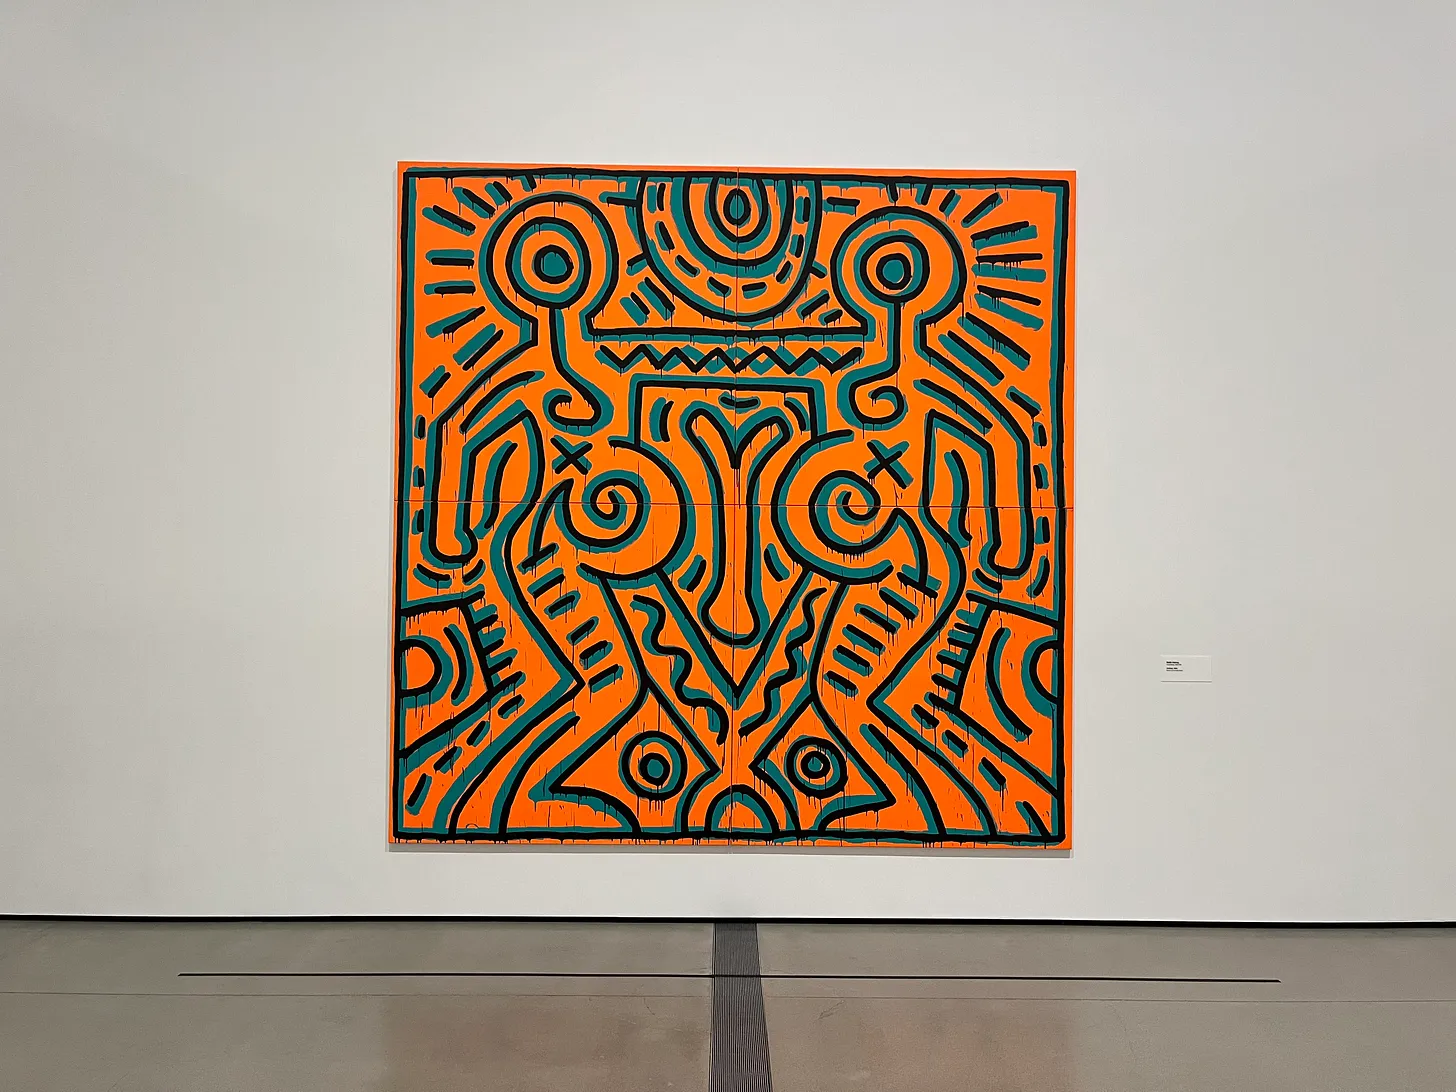 a large square orange canvas of art with stylized lines drawn by the artist Keith Haring